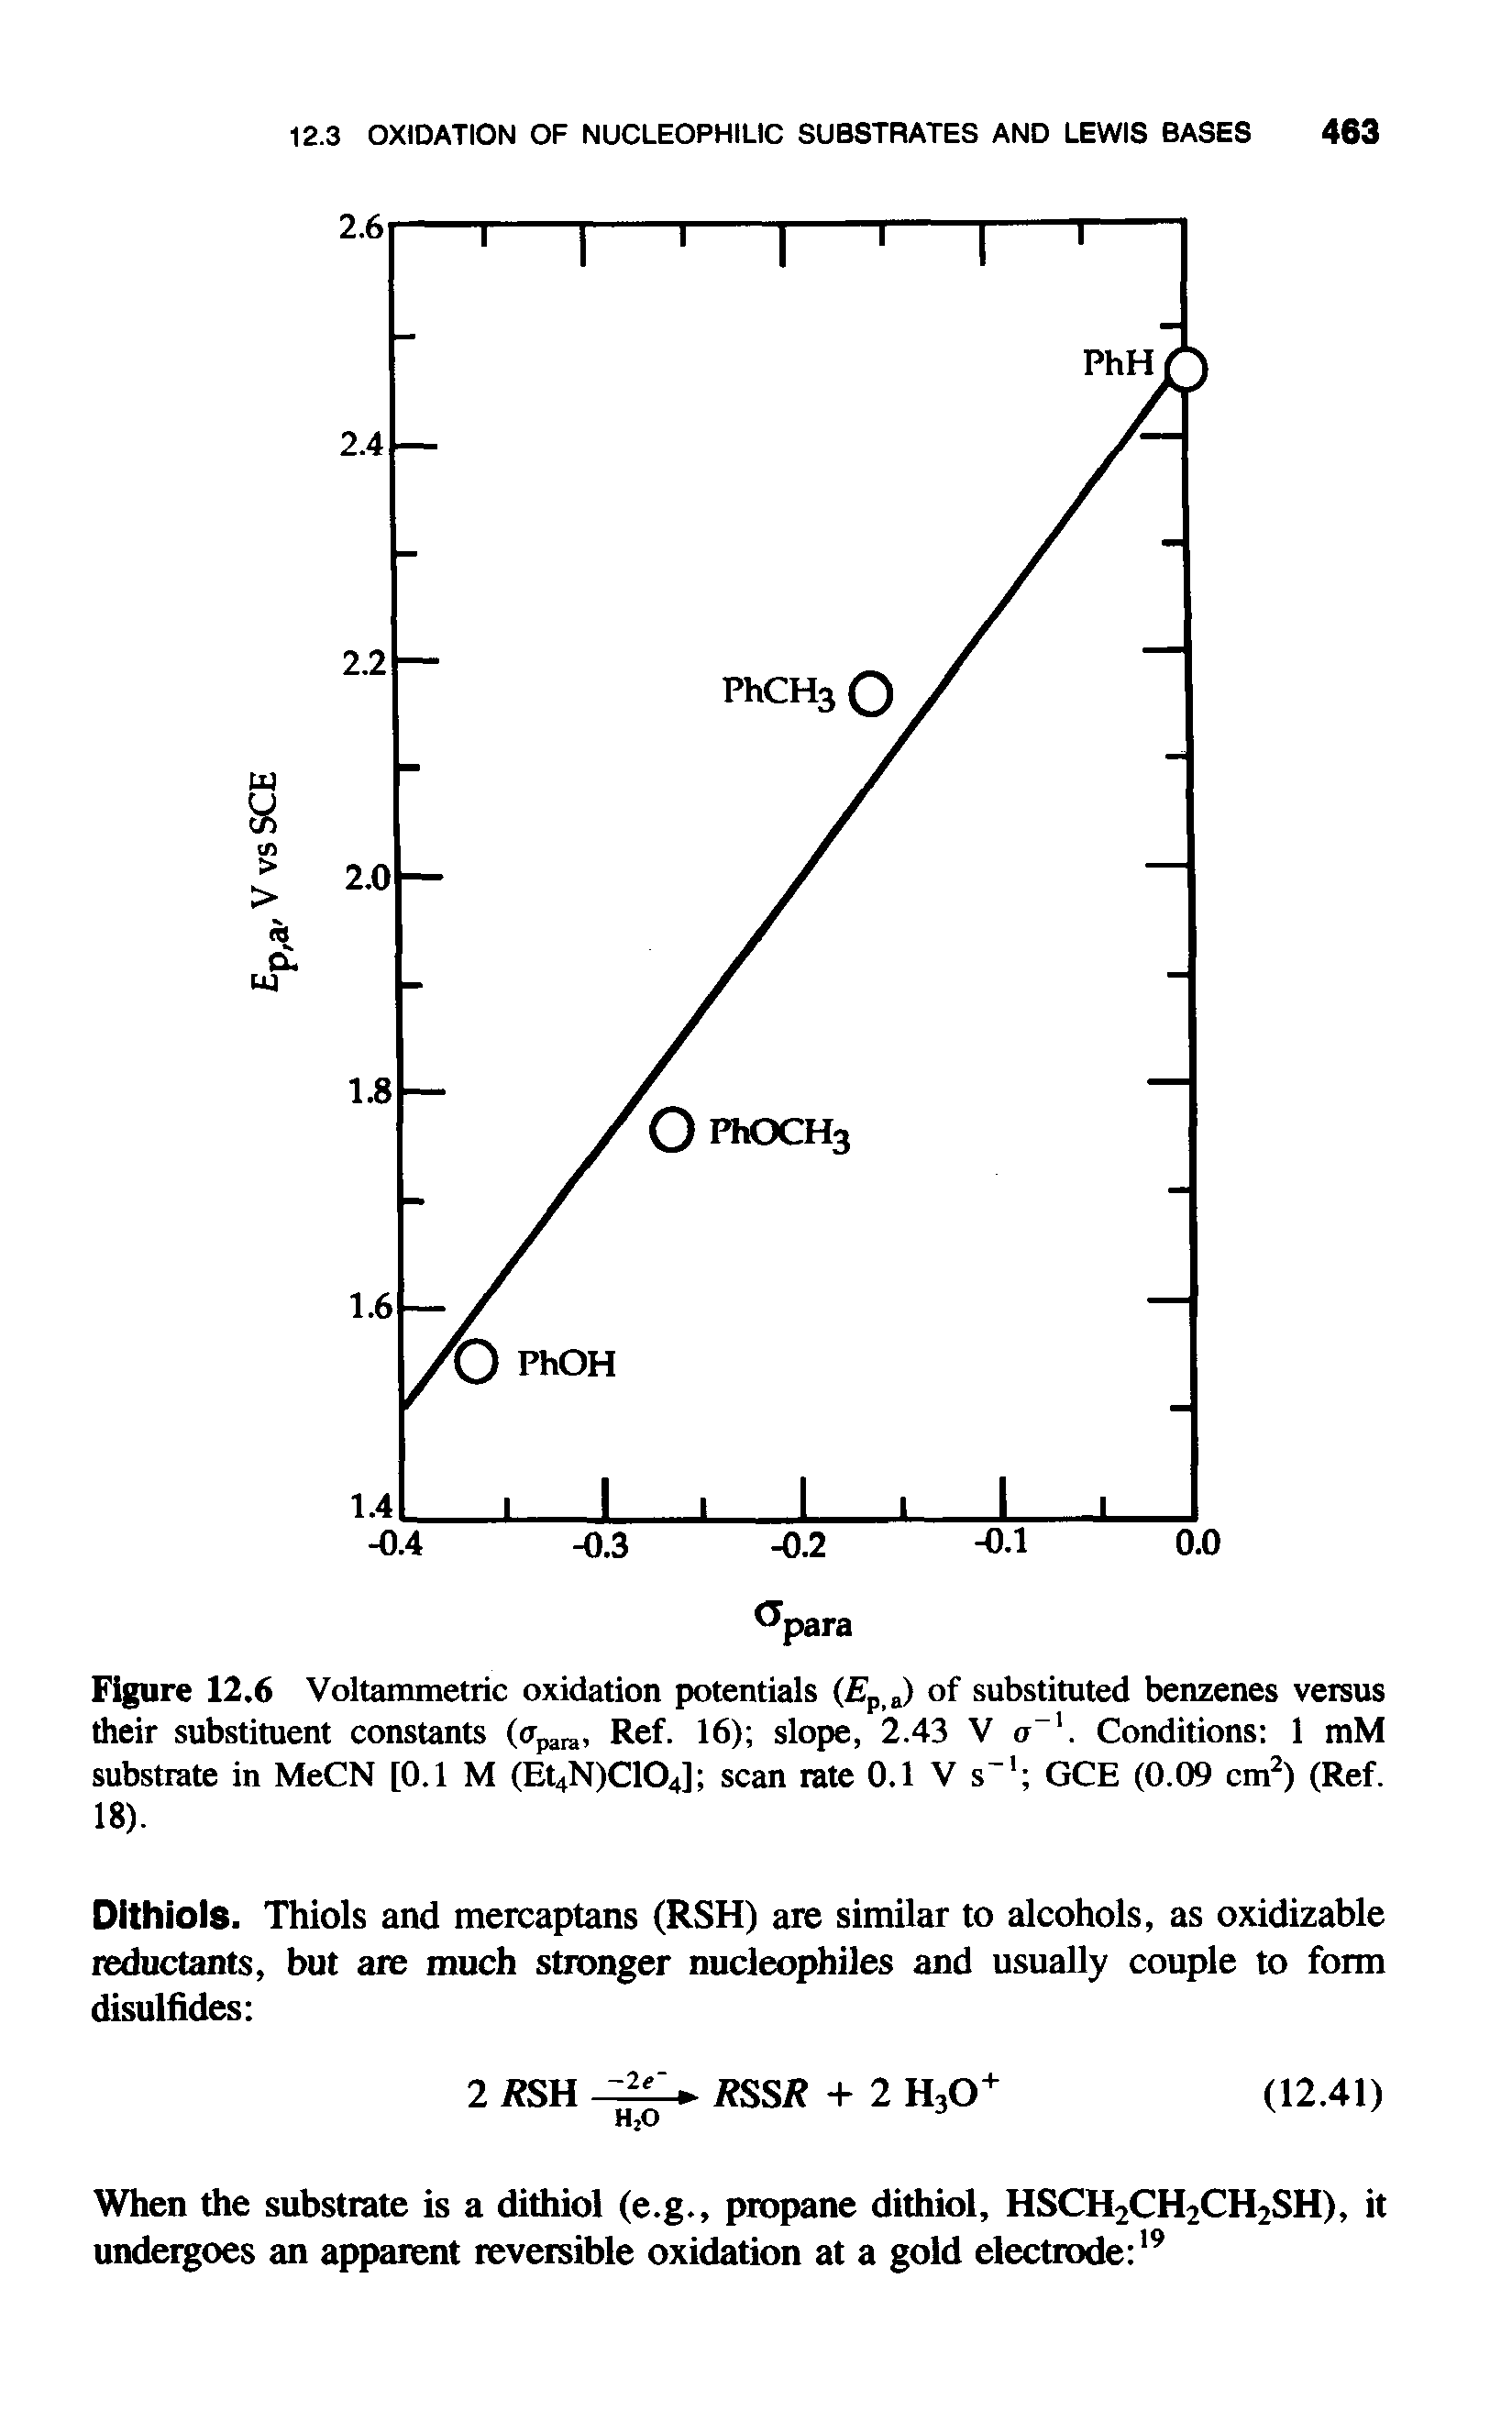 Figure 12.6 Voltammetric oxidation potentials ( p a) of substituted benzenes versus their substituent constants (apara, Ref. 16) slope, 2.43 V a. Conditions 1 mM substrate in MeCN [0.1 M (Et4N)C104] scan rate 0.1 V s 1 GCE (0.09 cm2) (Ref. 18).